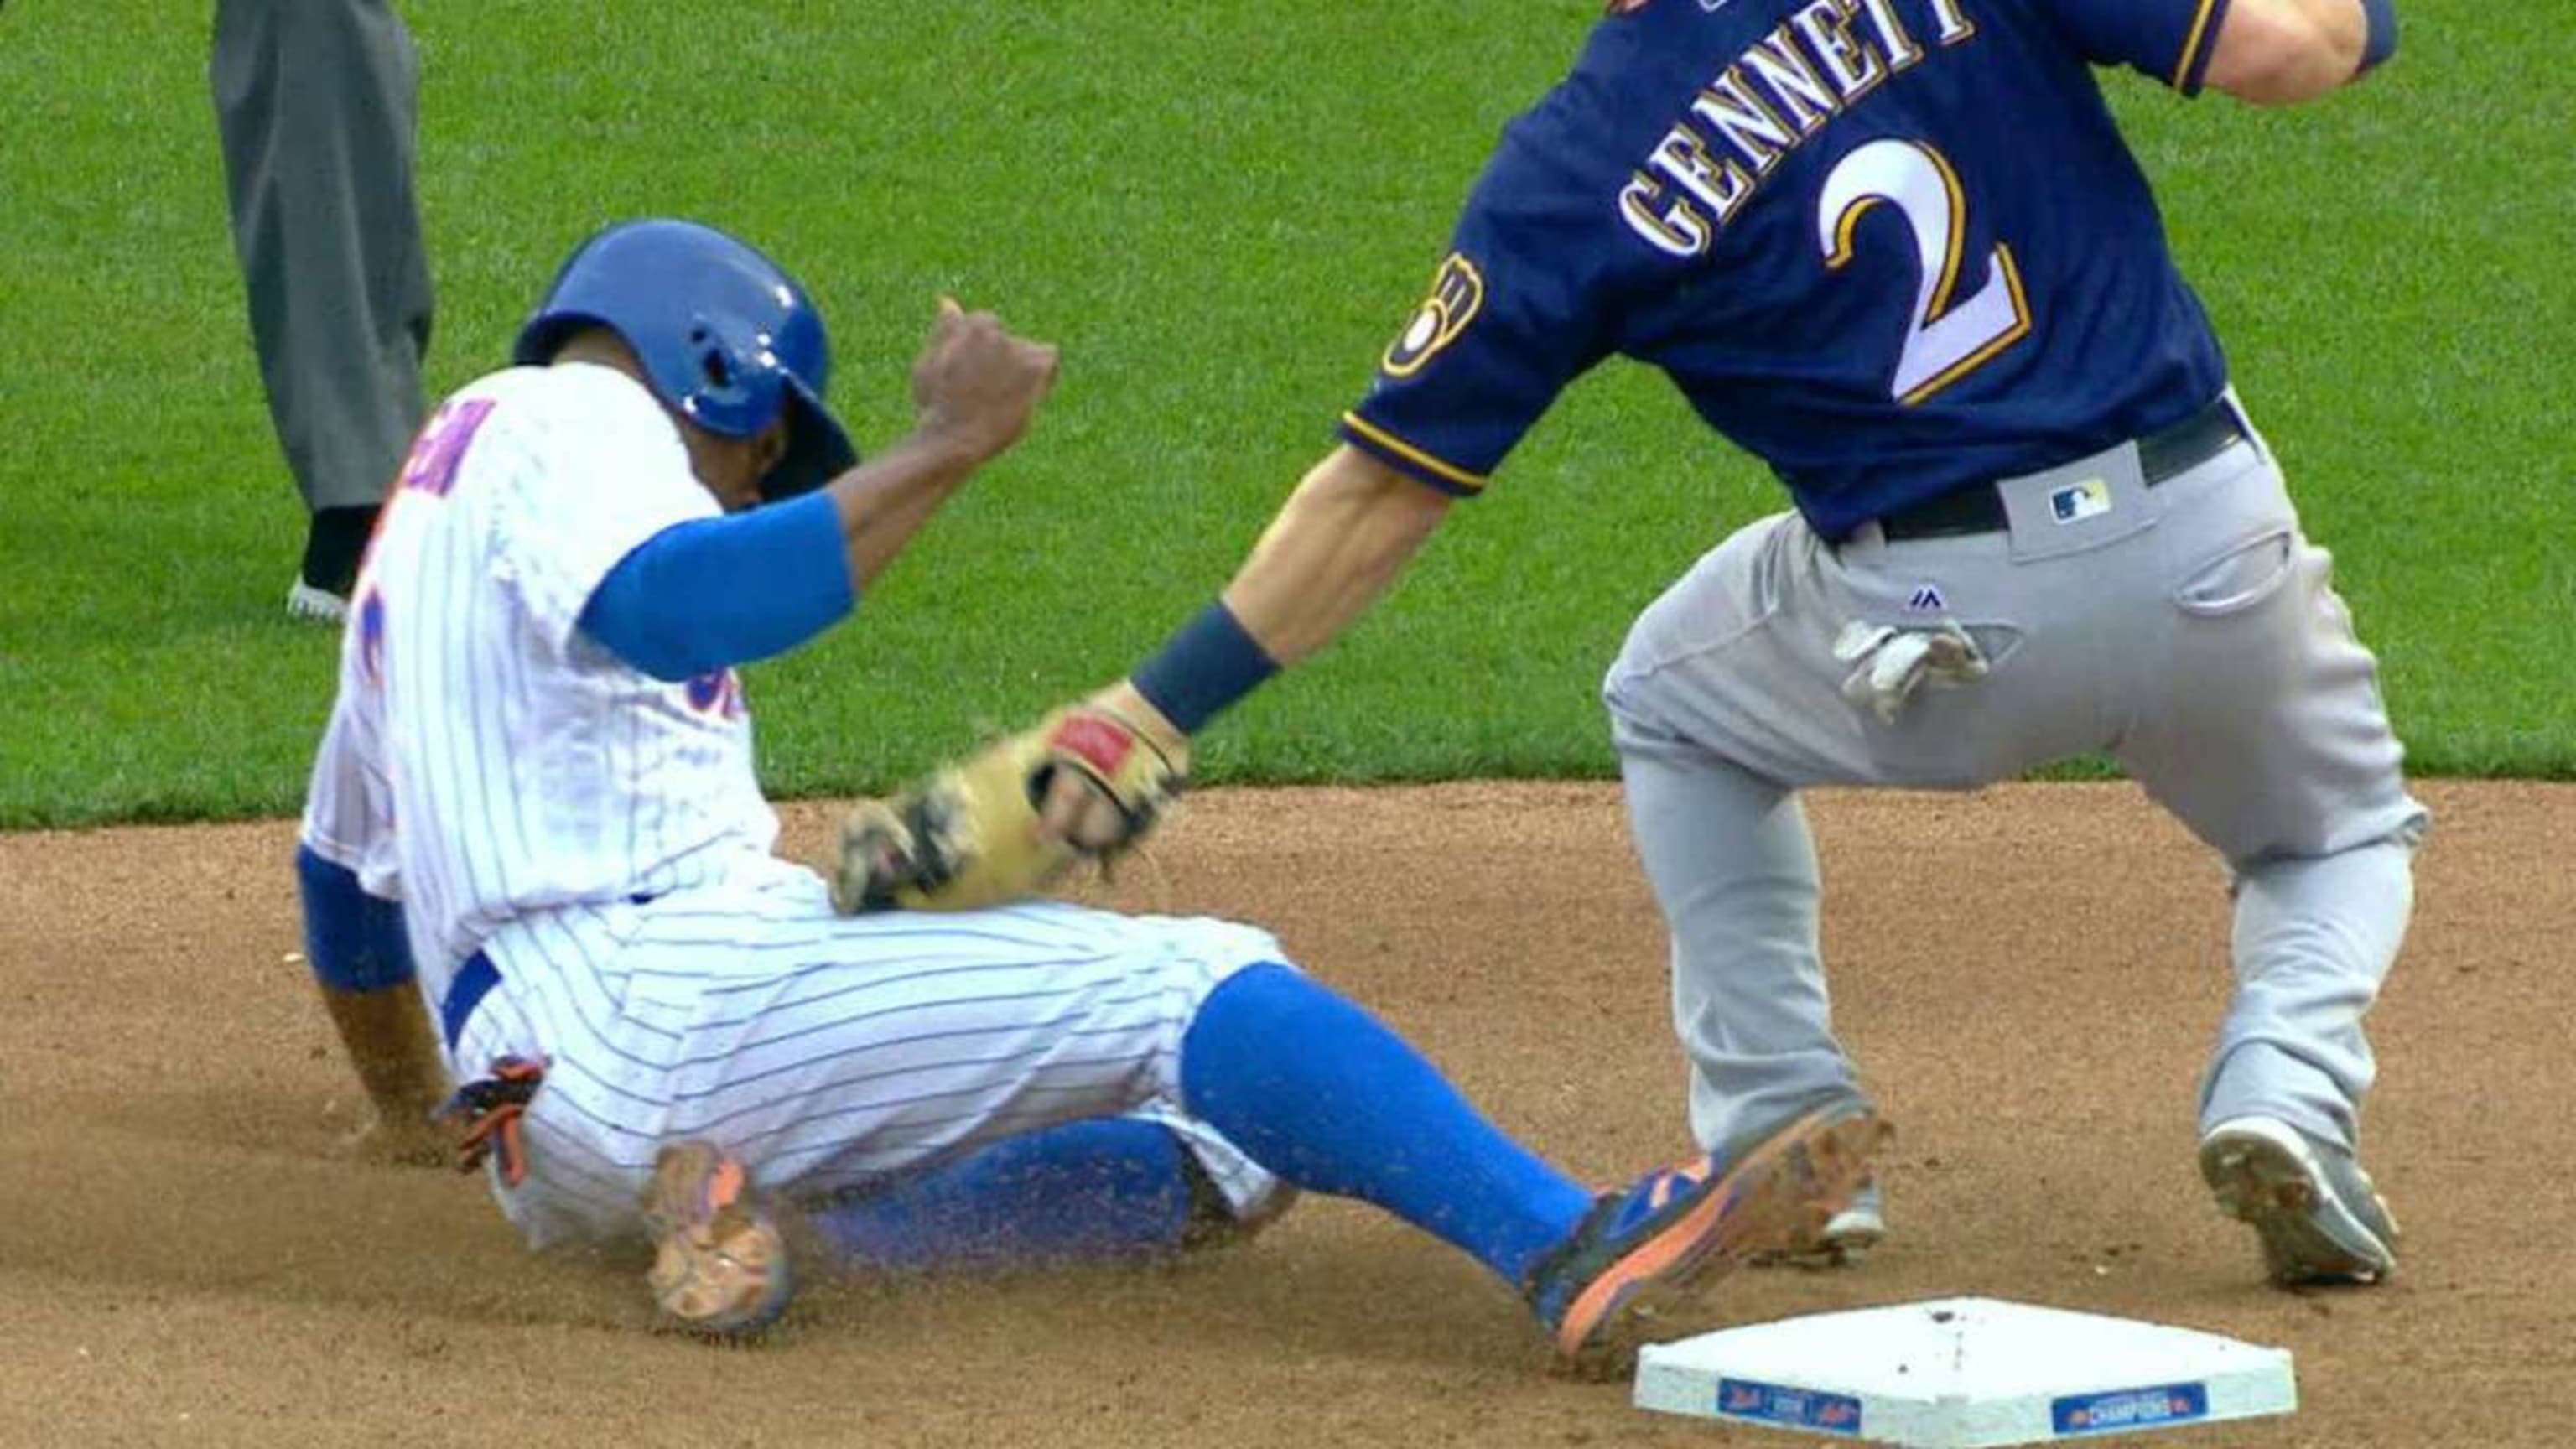 David Wright gives Mets walk-off win over Brewers